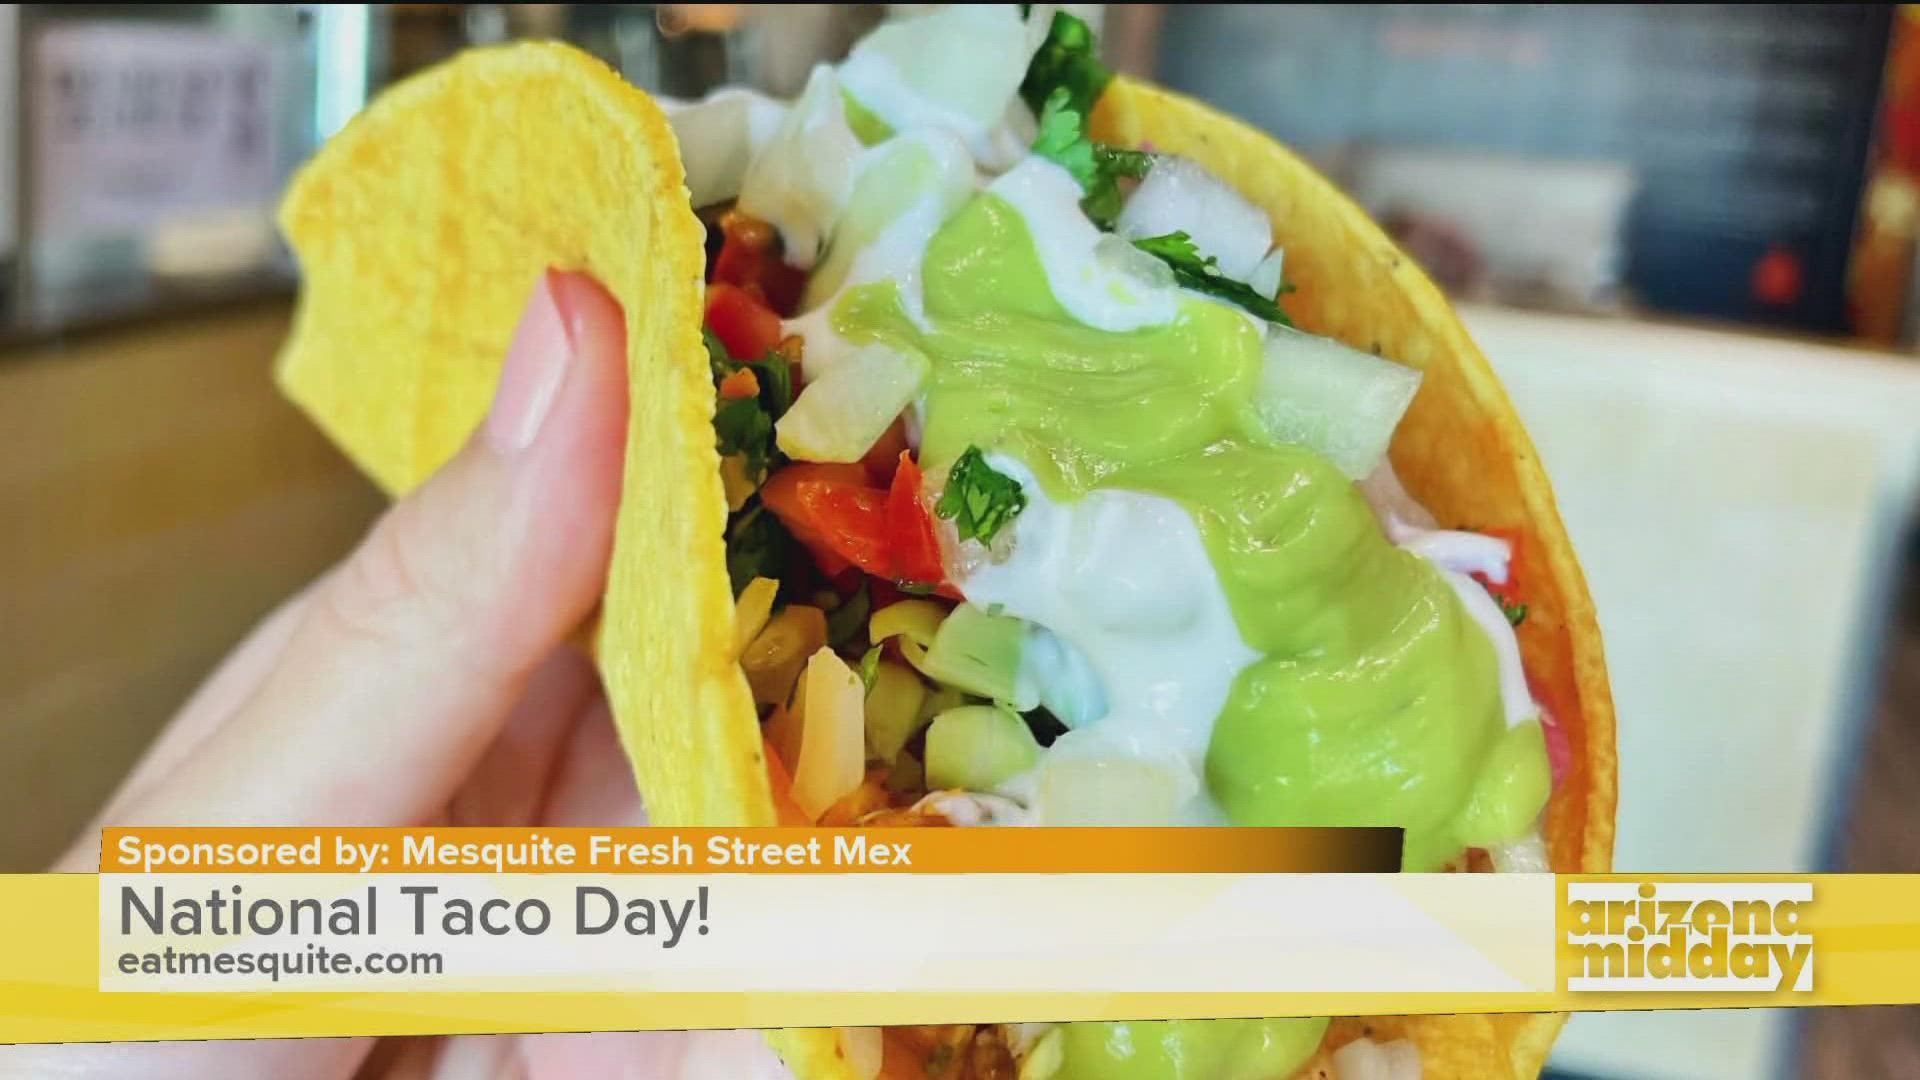 Mesquite Fresh Street Mex showed us how to make delicious tacos in our Arizona Midday kitchen.